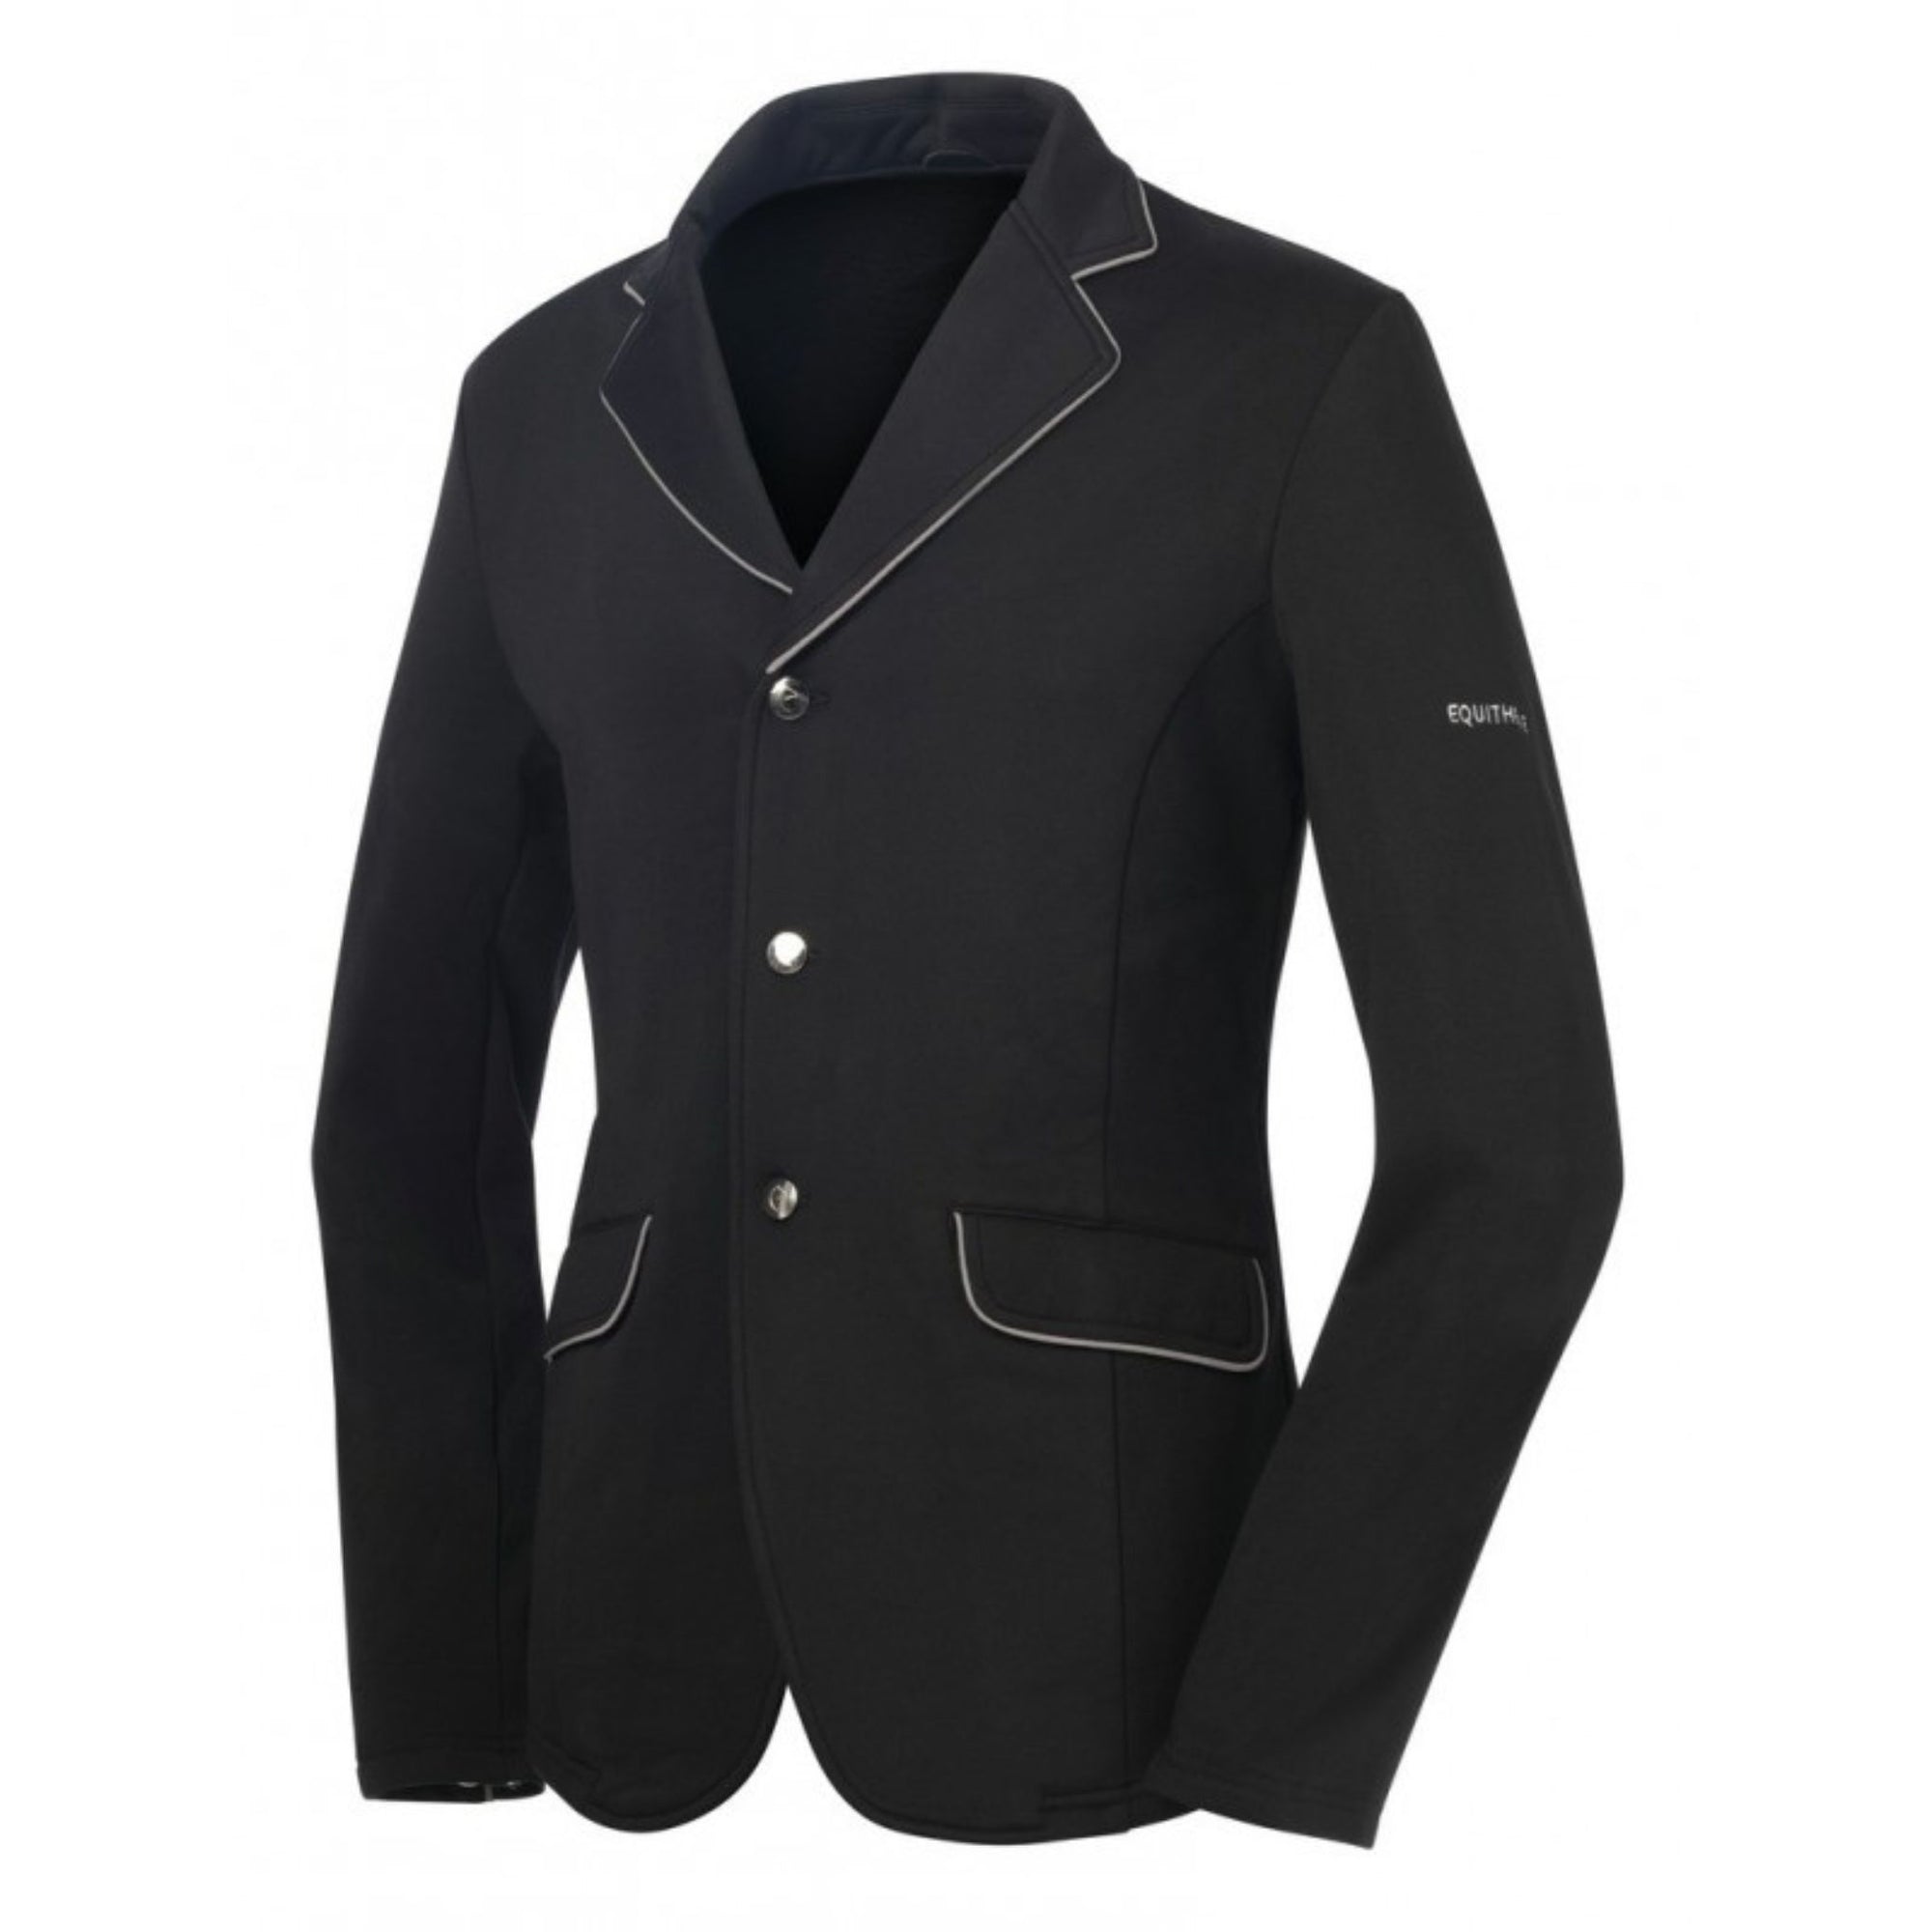 Equi-theme soft classic competition jacket.